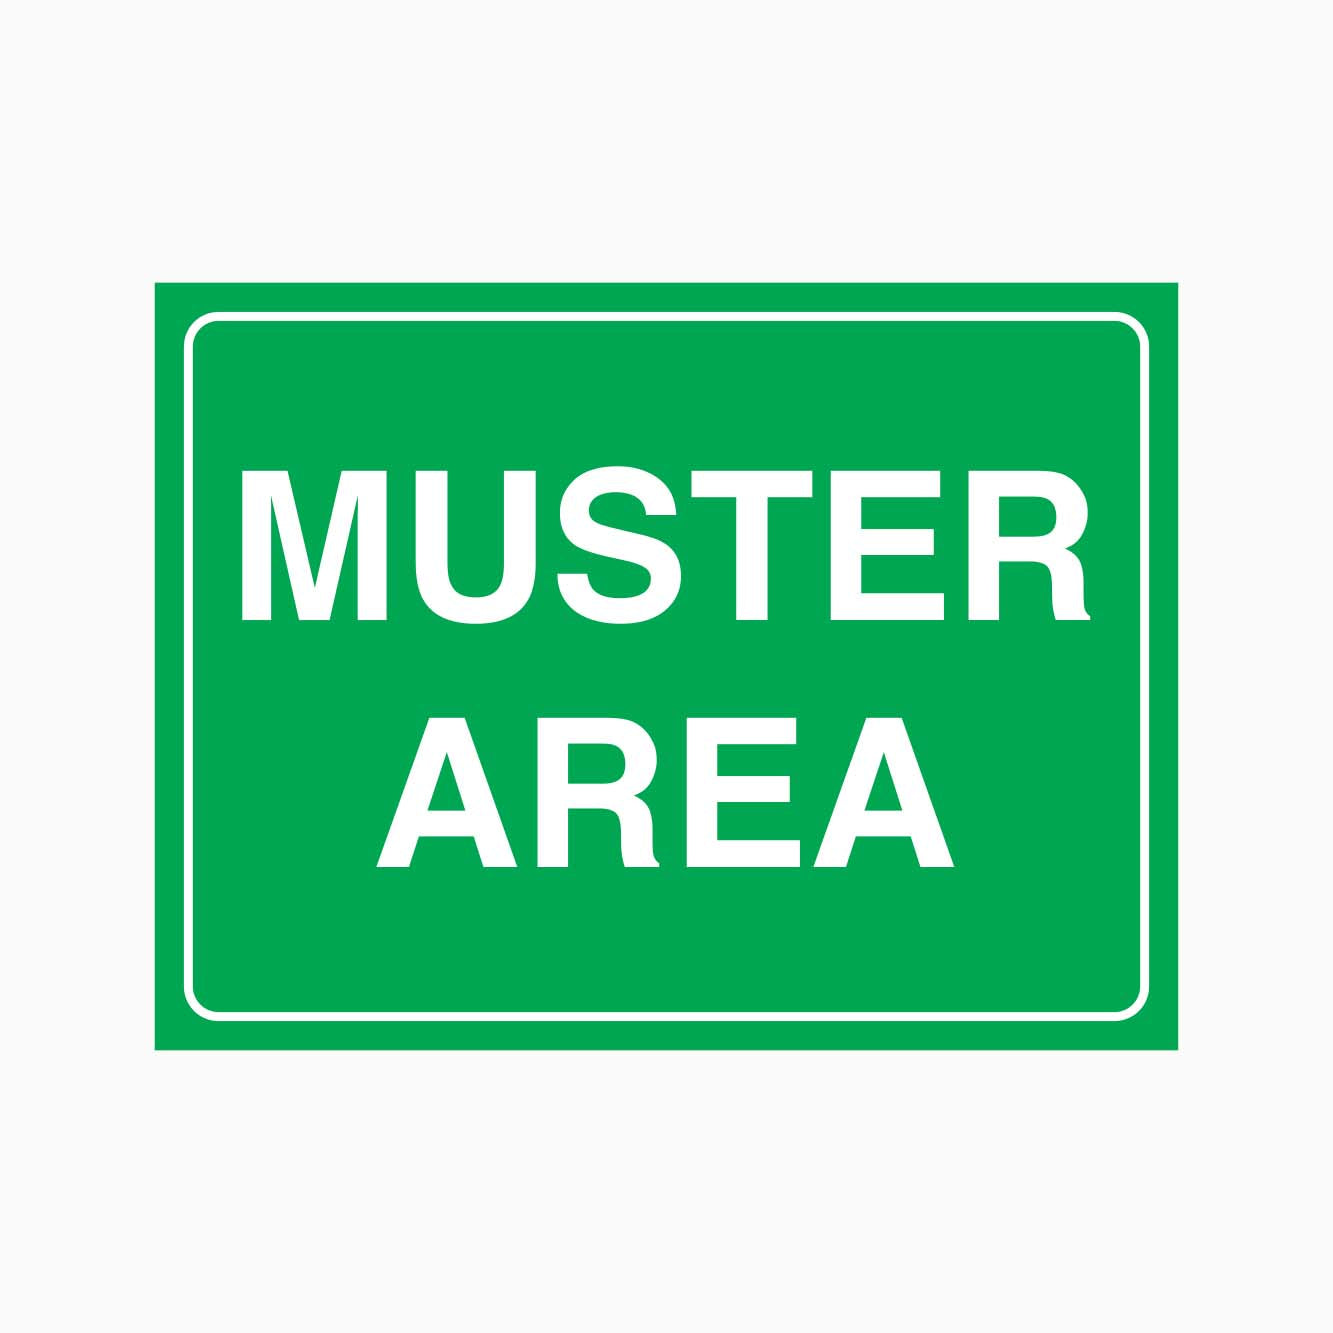 MUSTER AREA SIGN - GET SIGNS